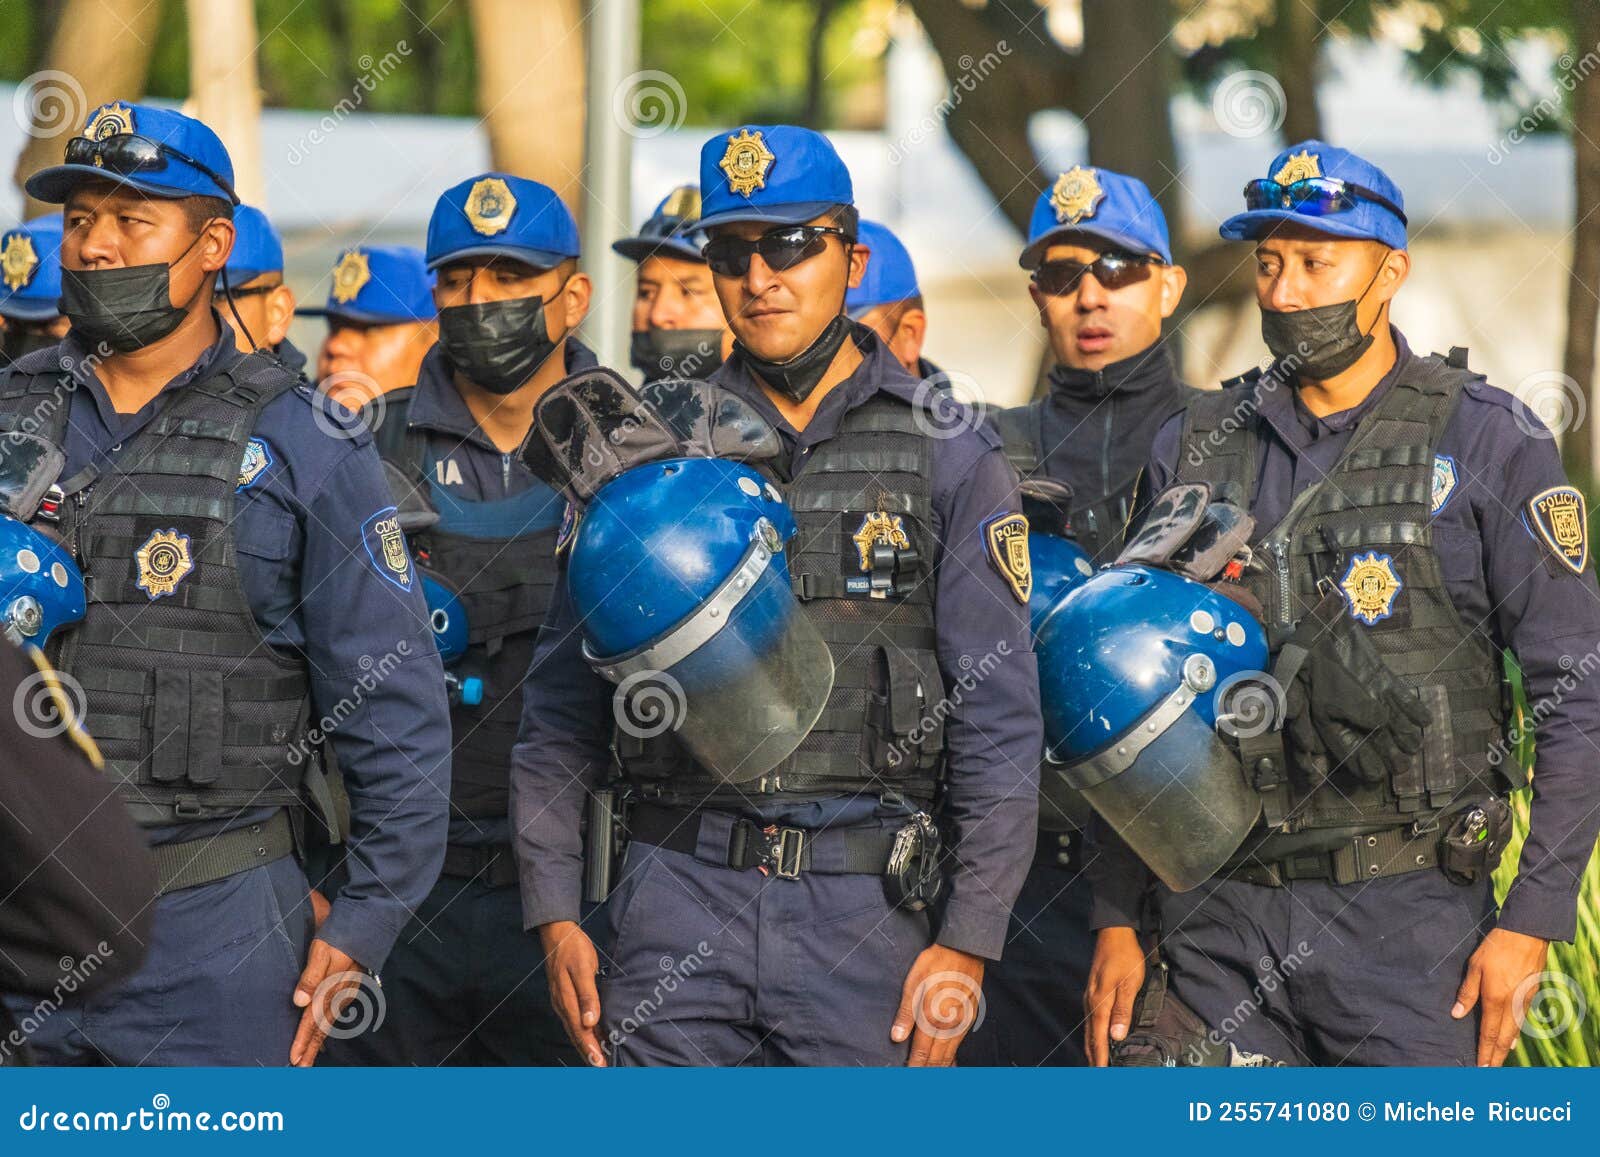 Mexican Police Team Lining Up Training in a Park in Mexico City CDMX Drug  War with Blue Equipment Clothes and Helmets Editorial Image - Image of  mexican, city: 255741080